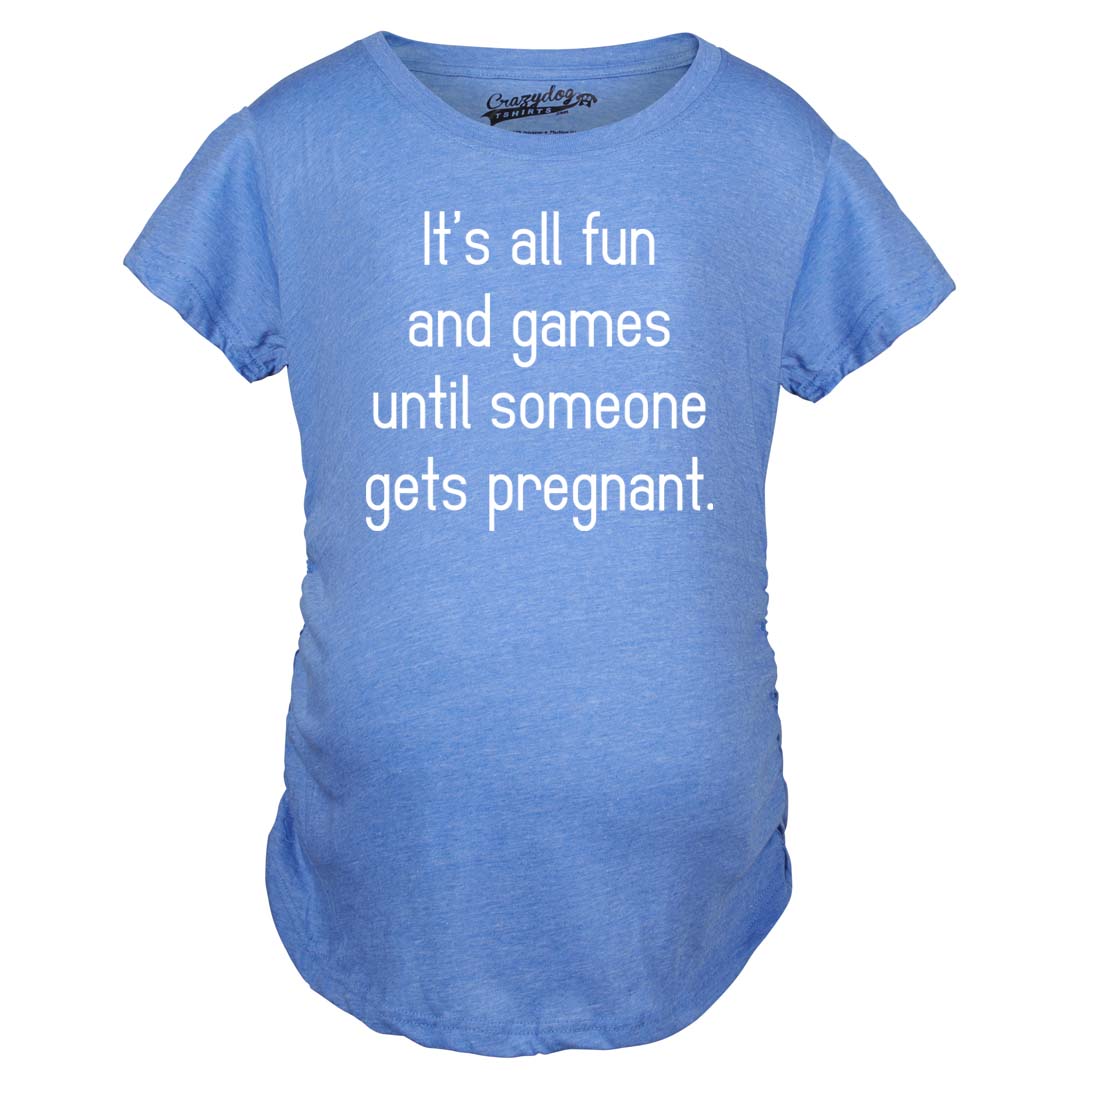 Funny Heather Light Blue Fun And Games Maternity T Shirt Nerdy Tee